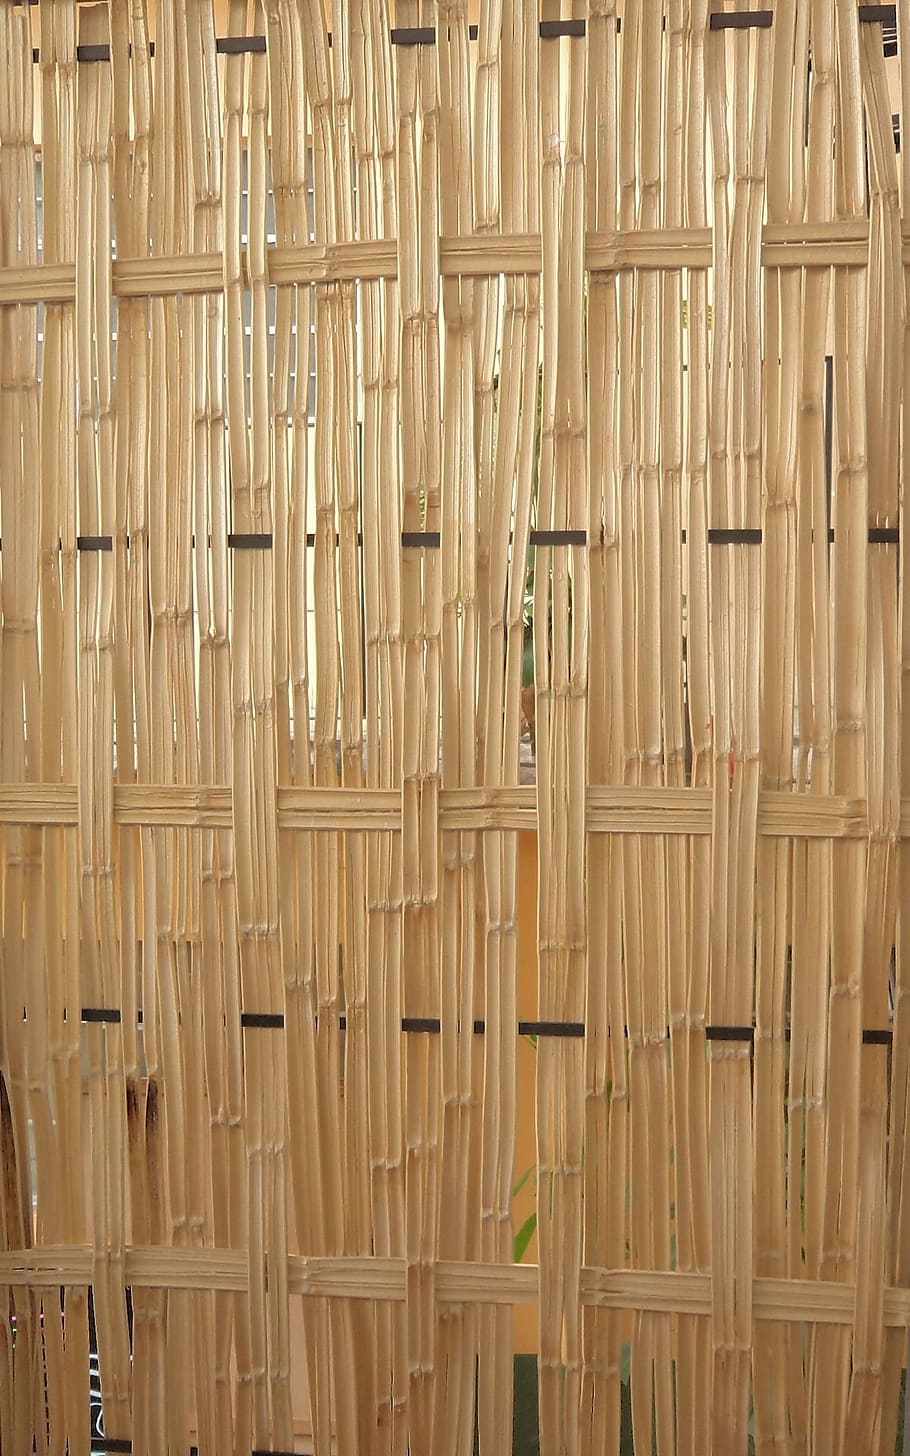 bamboo, wooden, walls, fences, crafts, crafting, reeds, woody, plants, timber